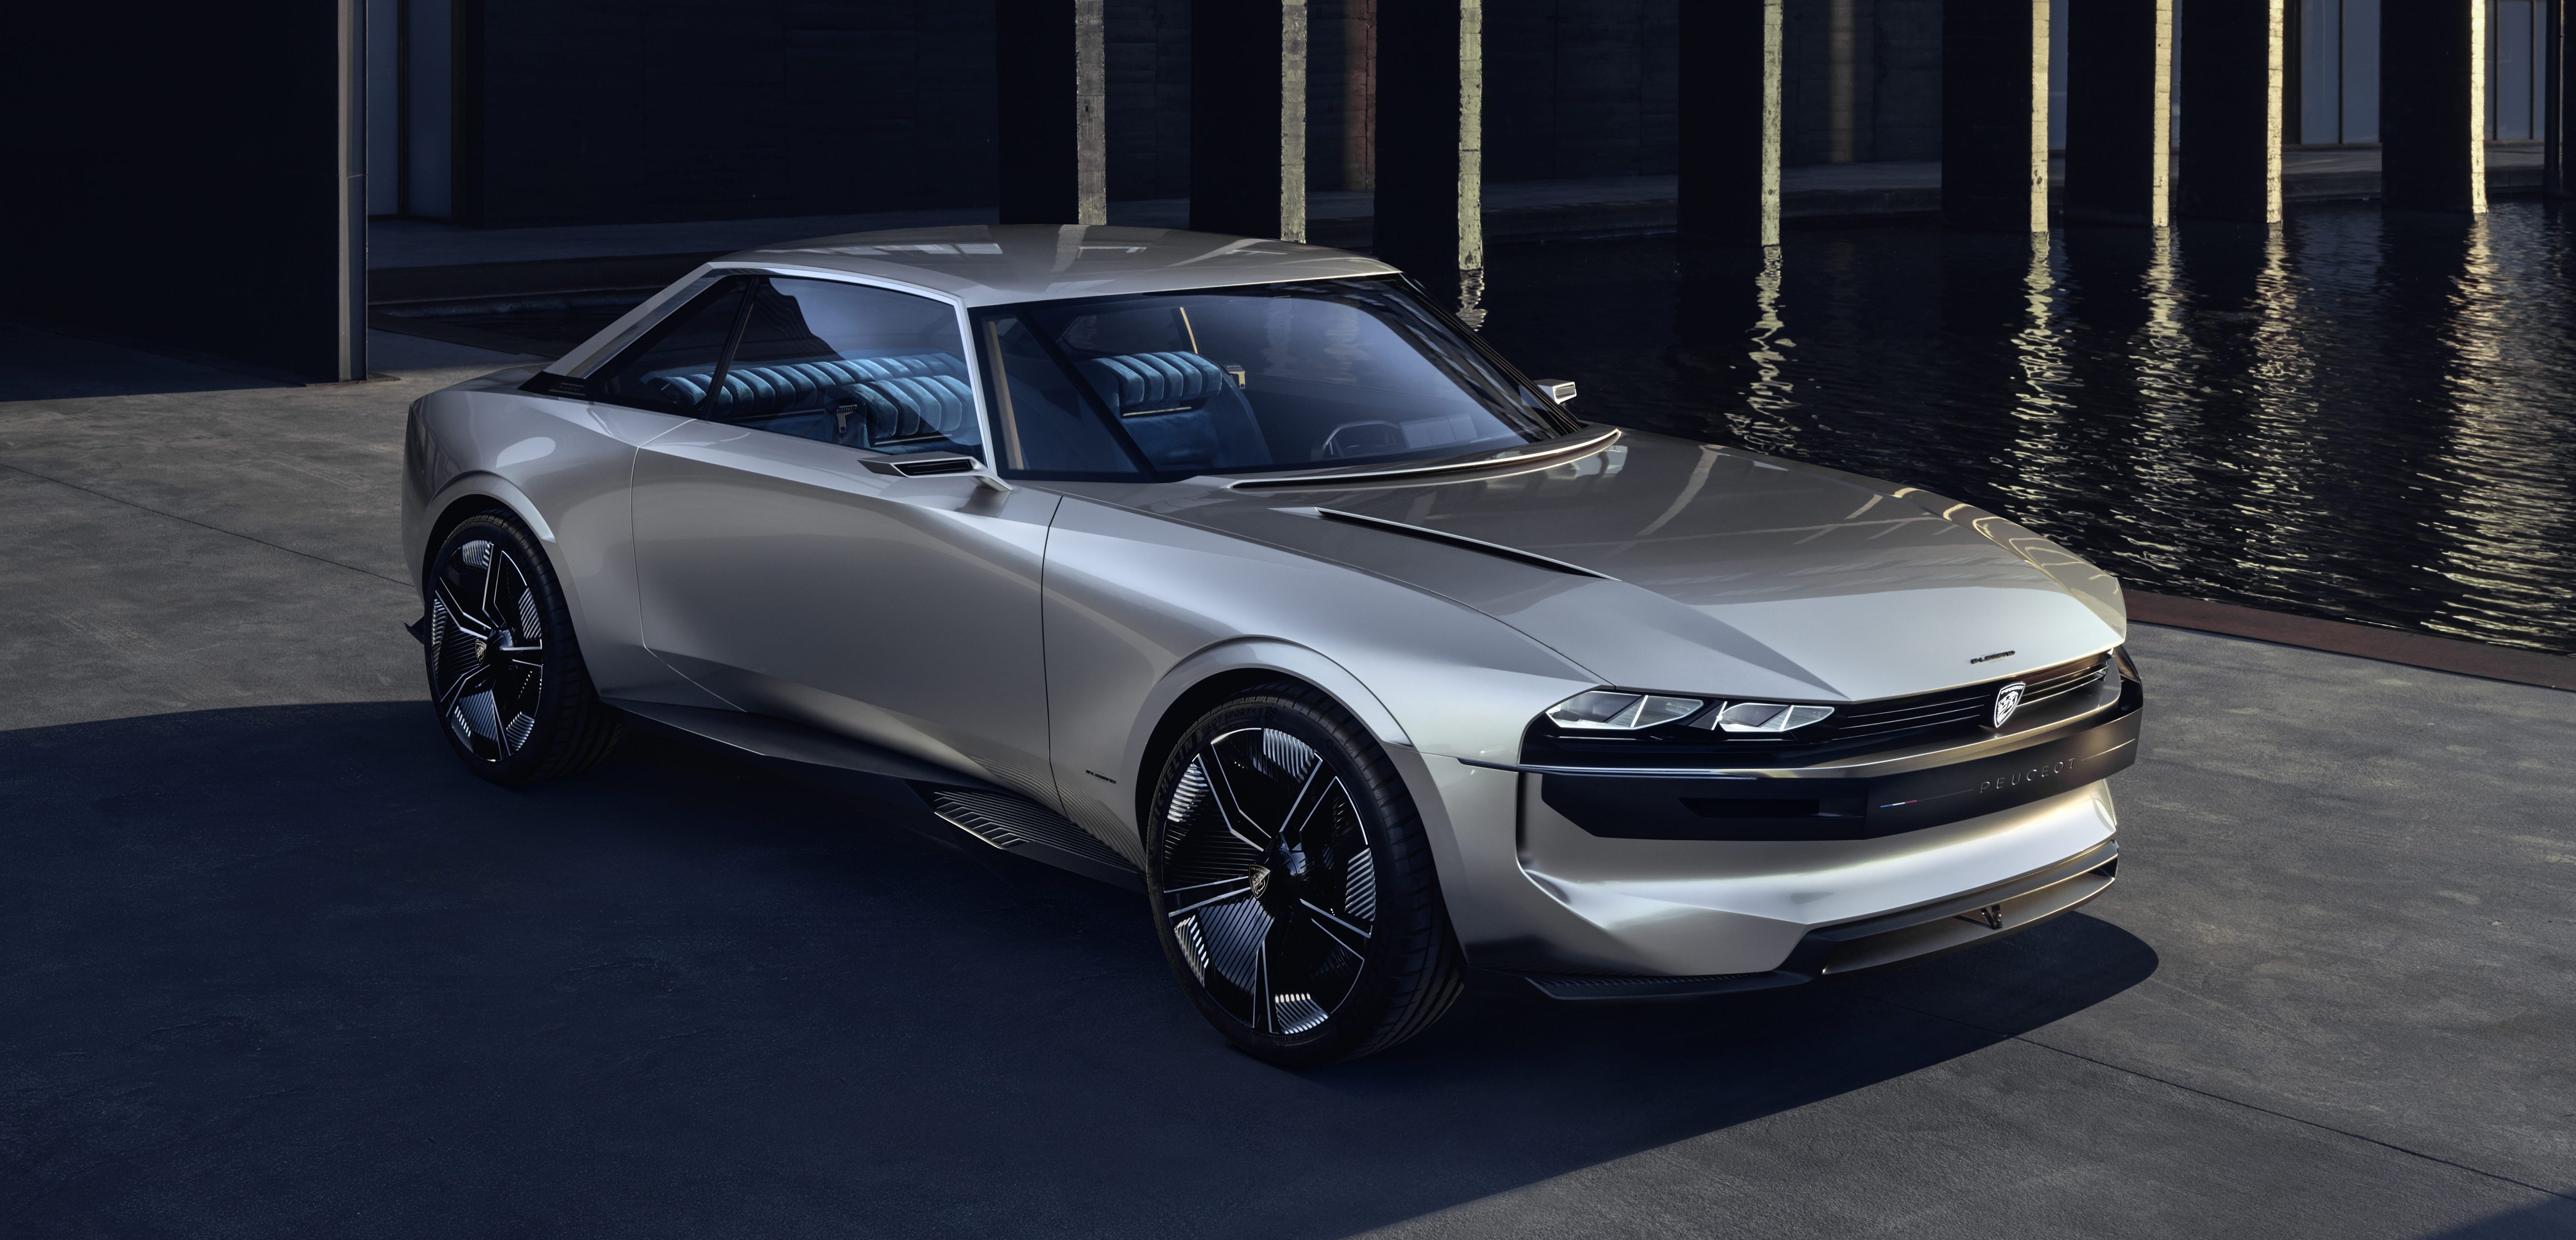 Peugeot unveils allelectric coupe concept with some muscle car DNA and